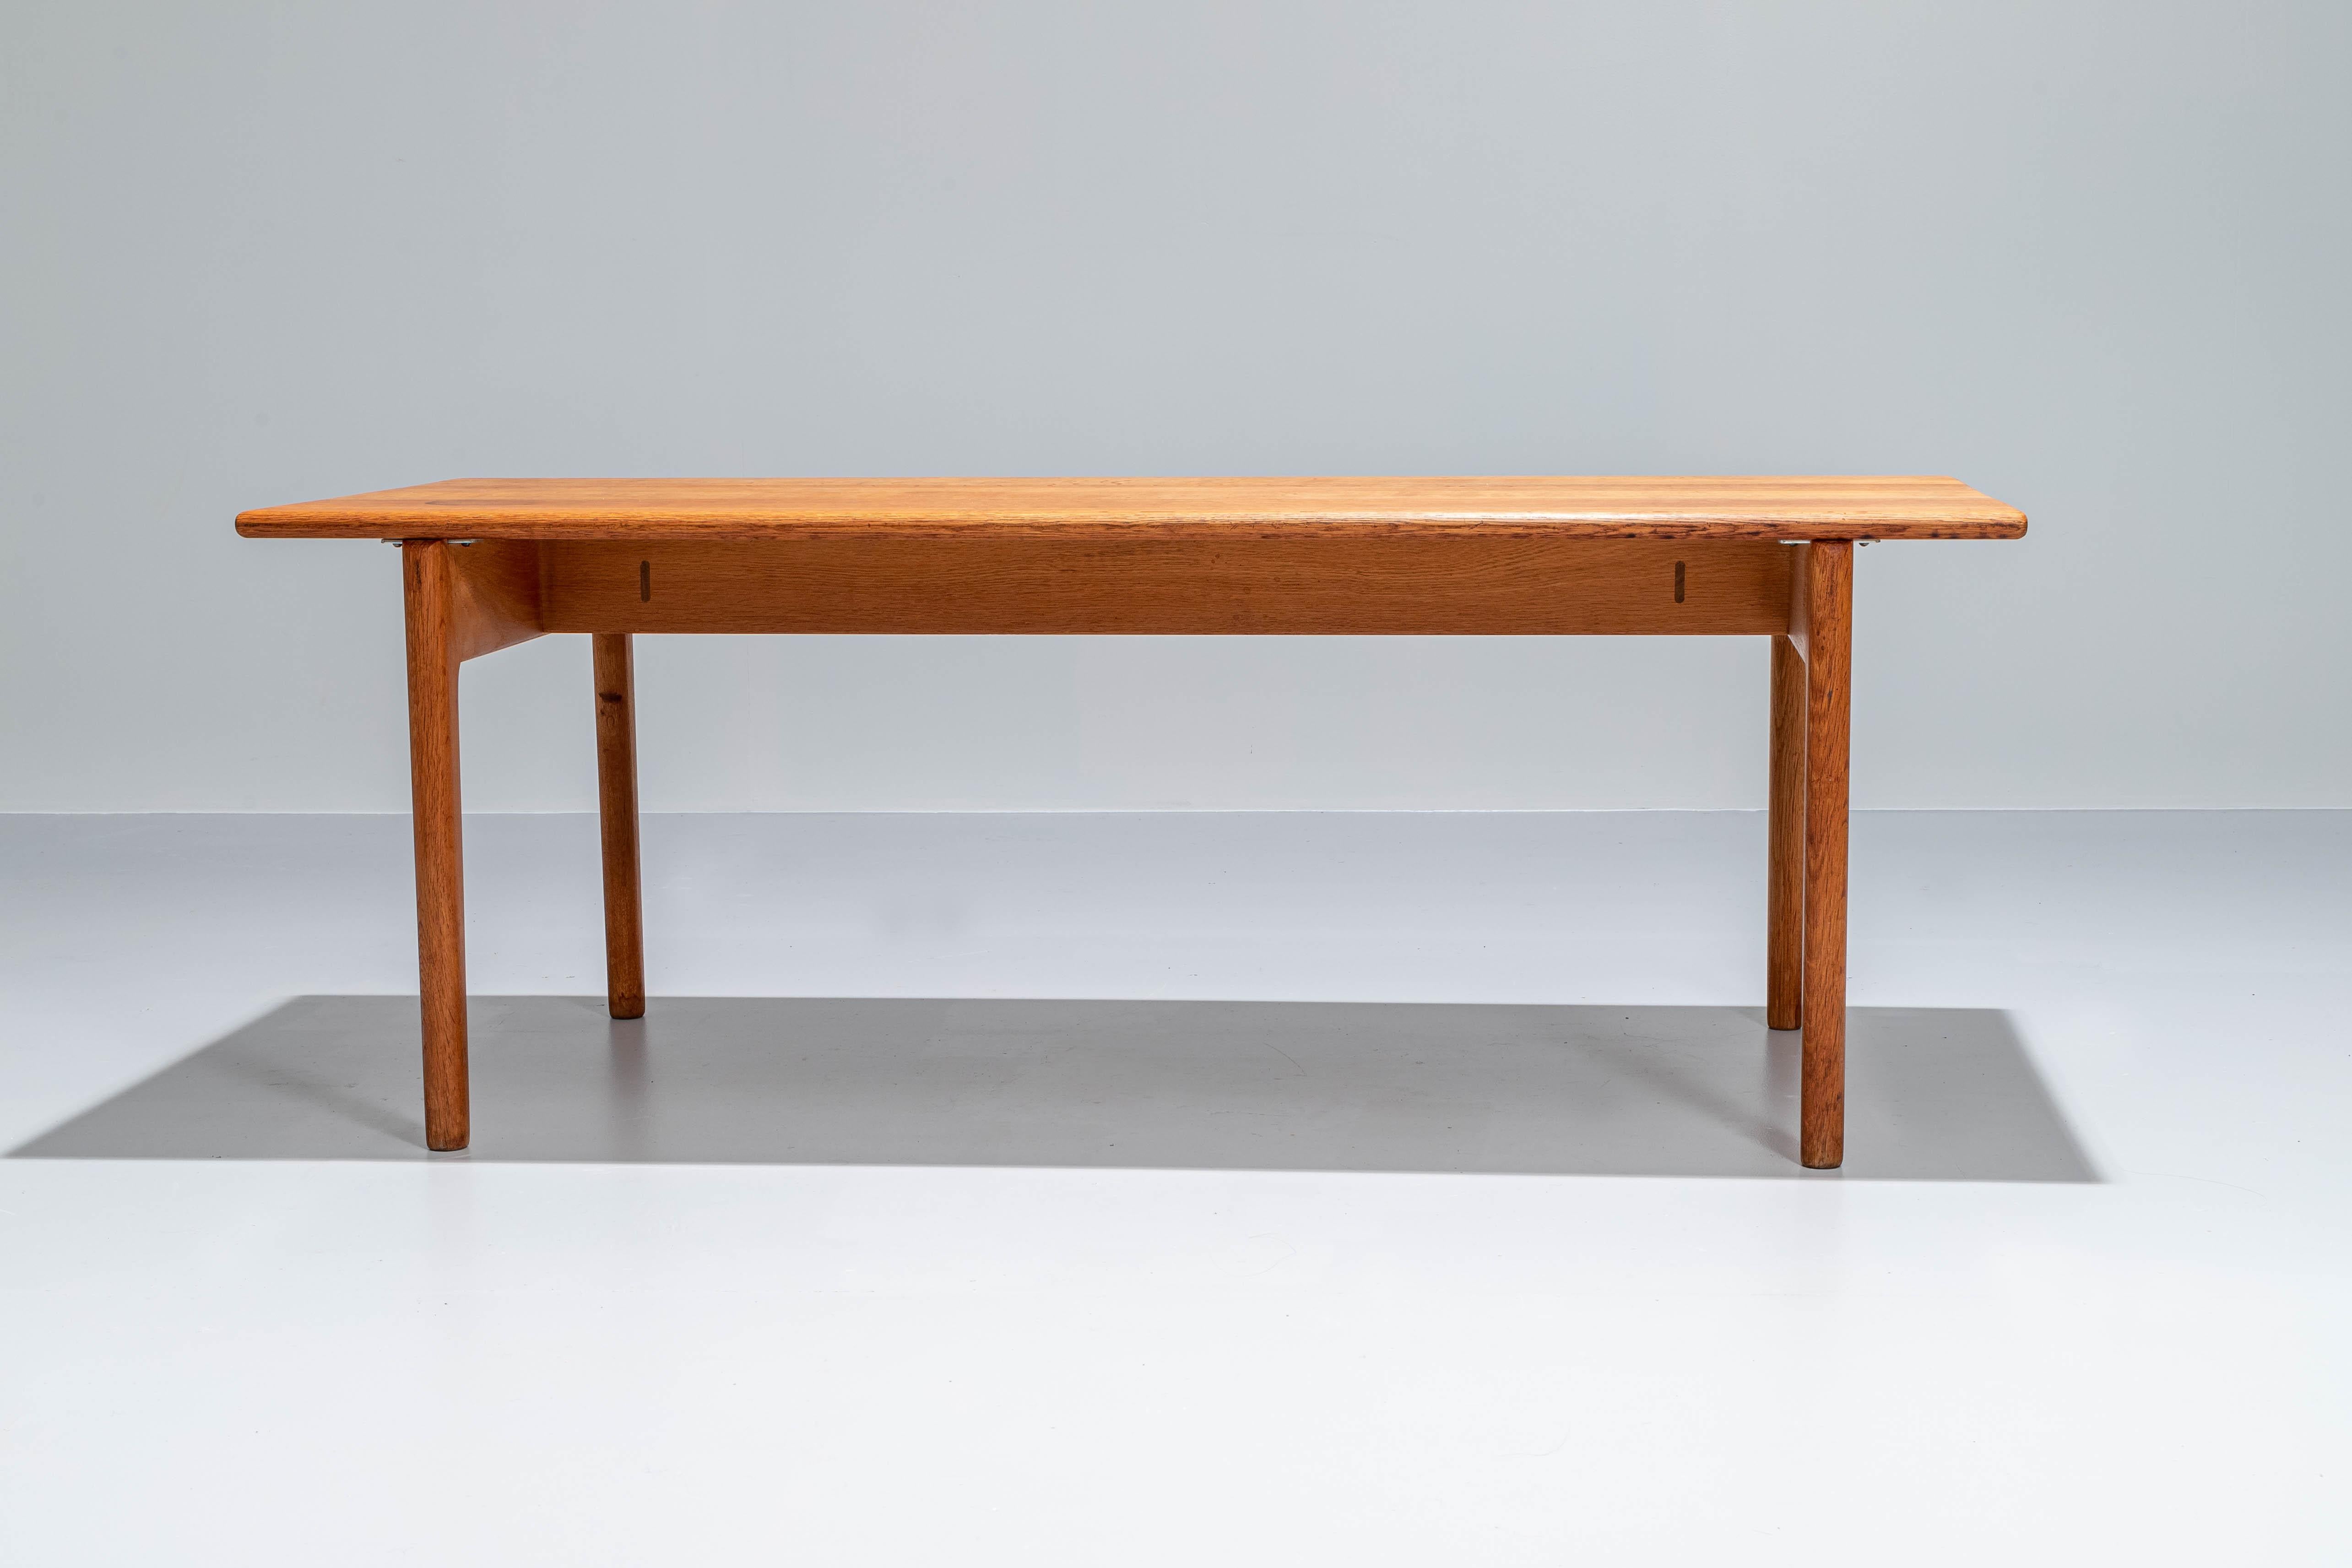 Danish Hans Wegner AT-15 Coffee Table by Andreas Tuck in solid Oak, Denmark, 1960's For Sale